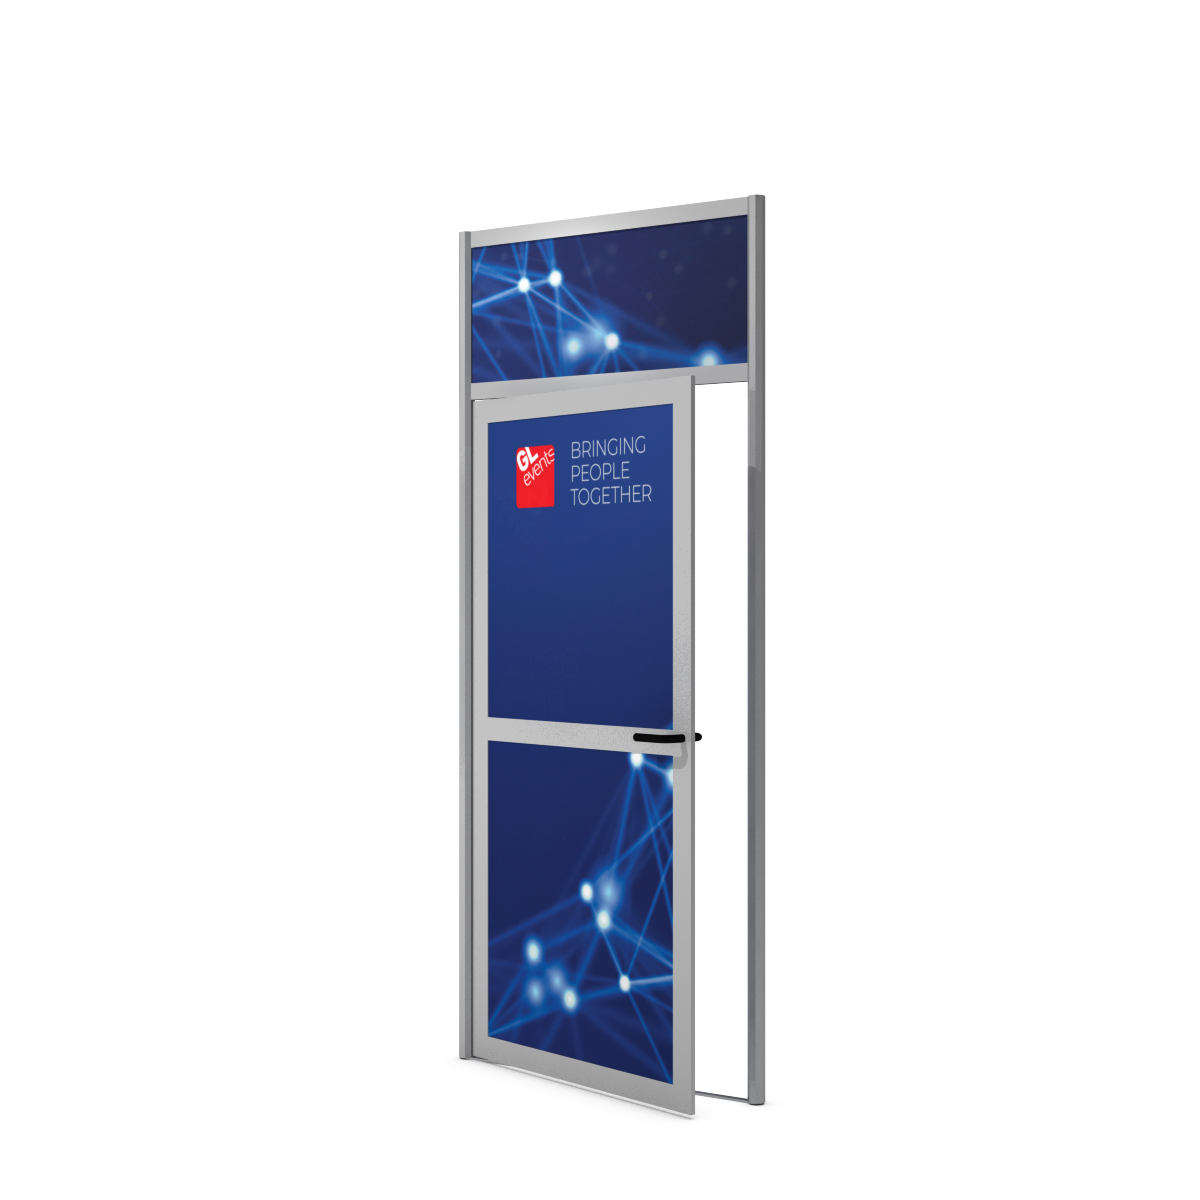 Single aluminum frame door with personalized signage infill